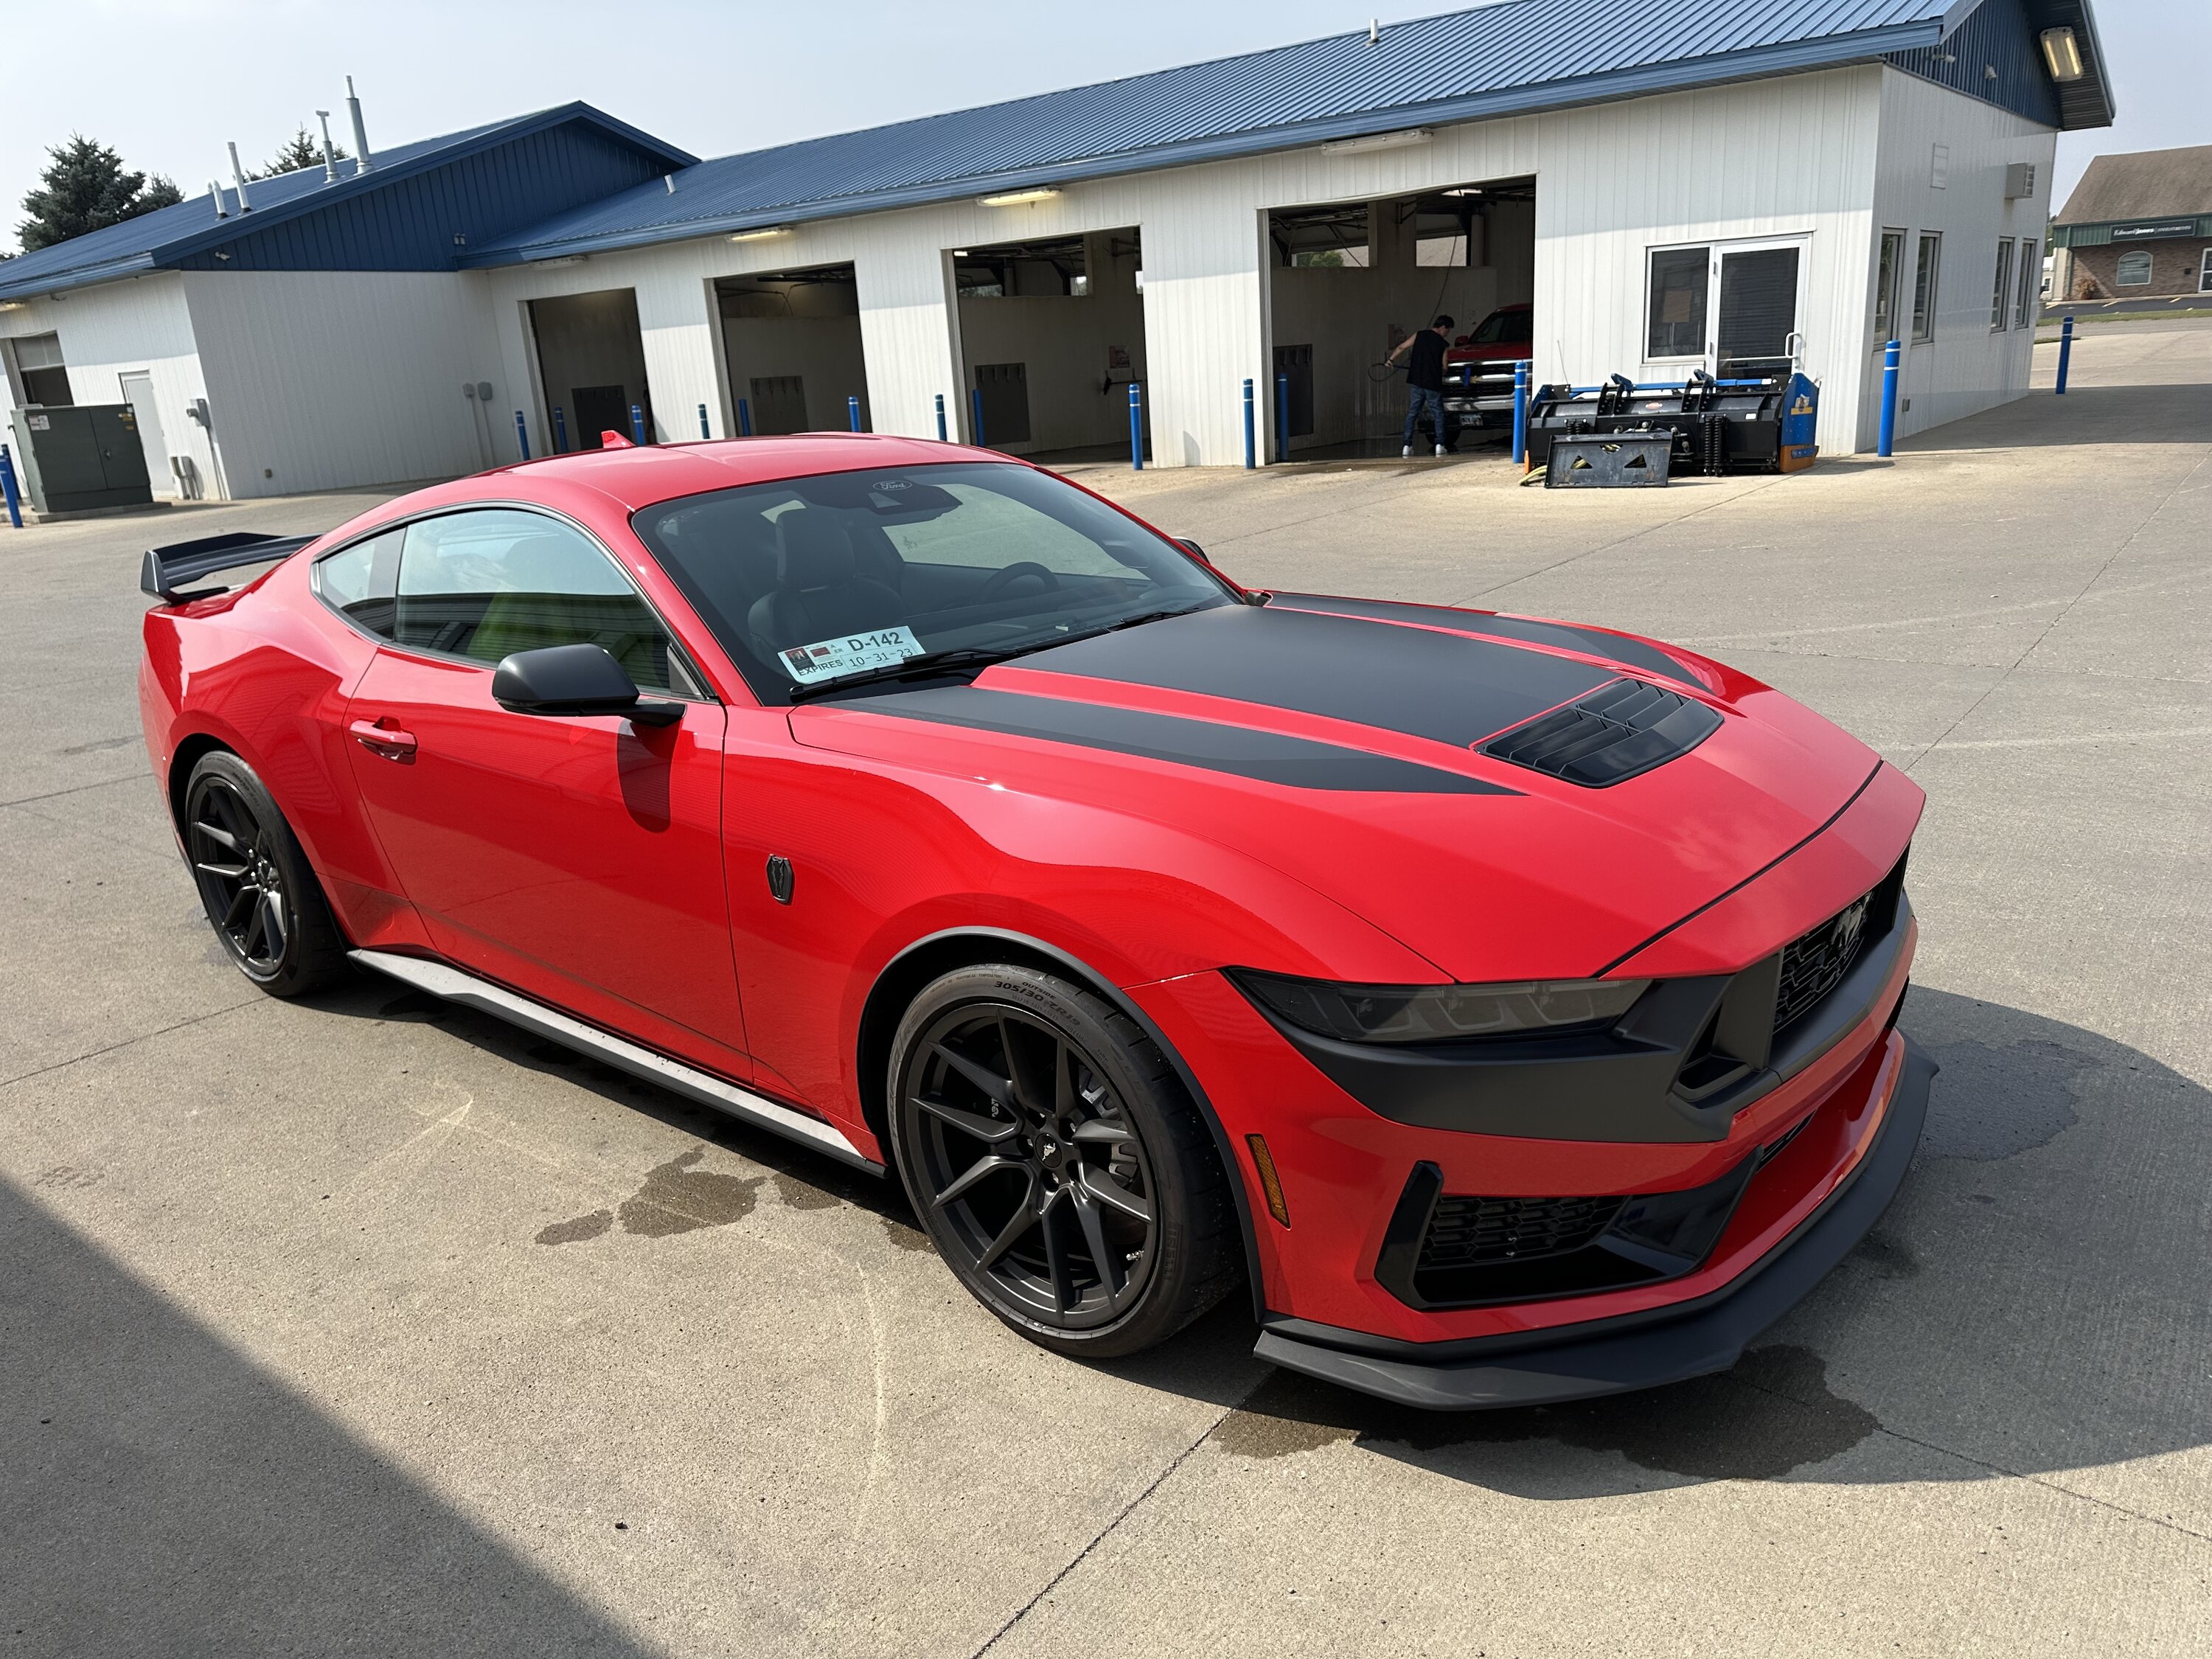 S650 Mustang BUILT & SHIPPED !! Tracker update 2023: What's your status? IMG_1385